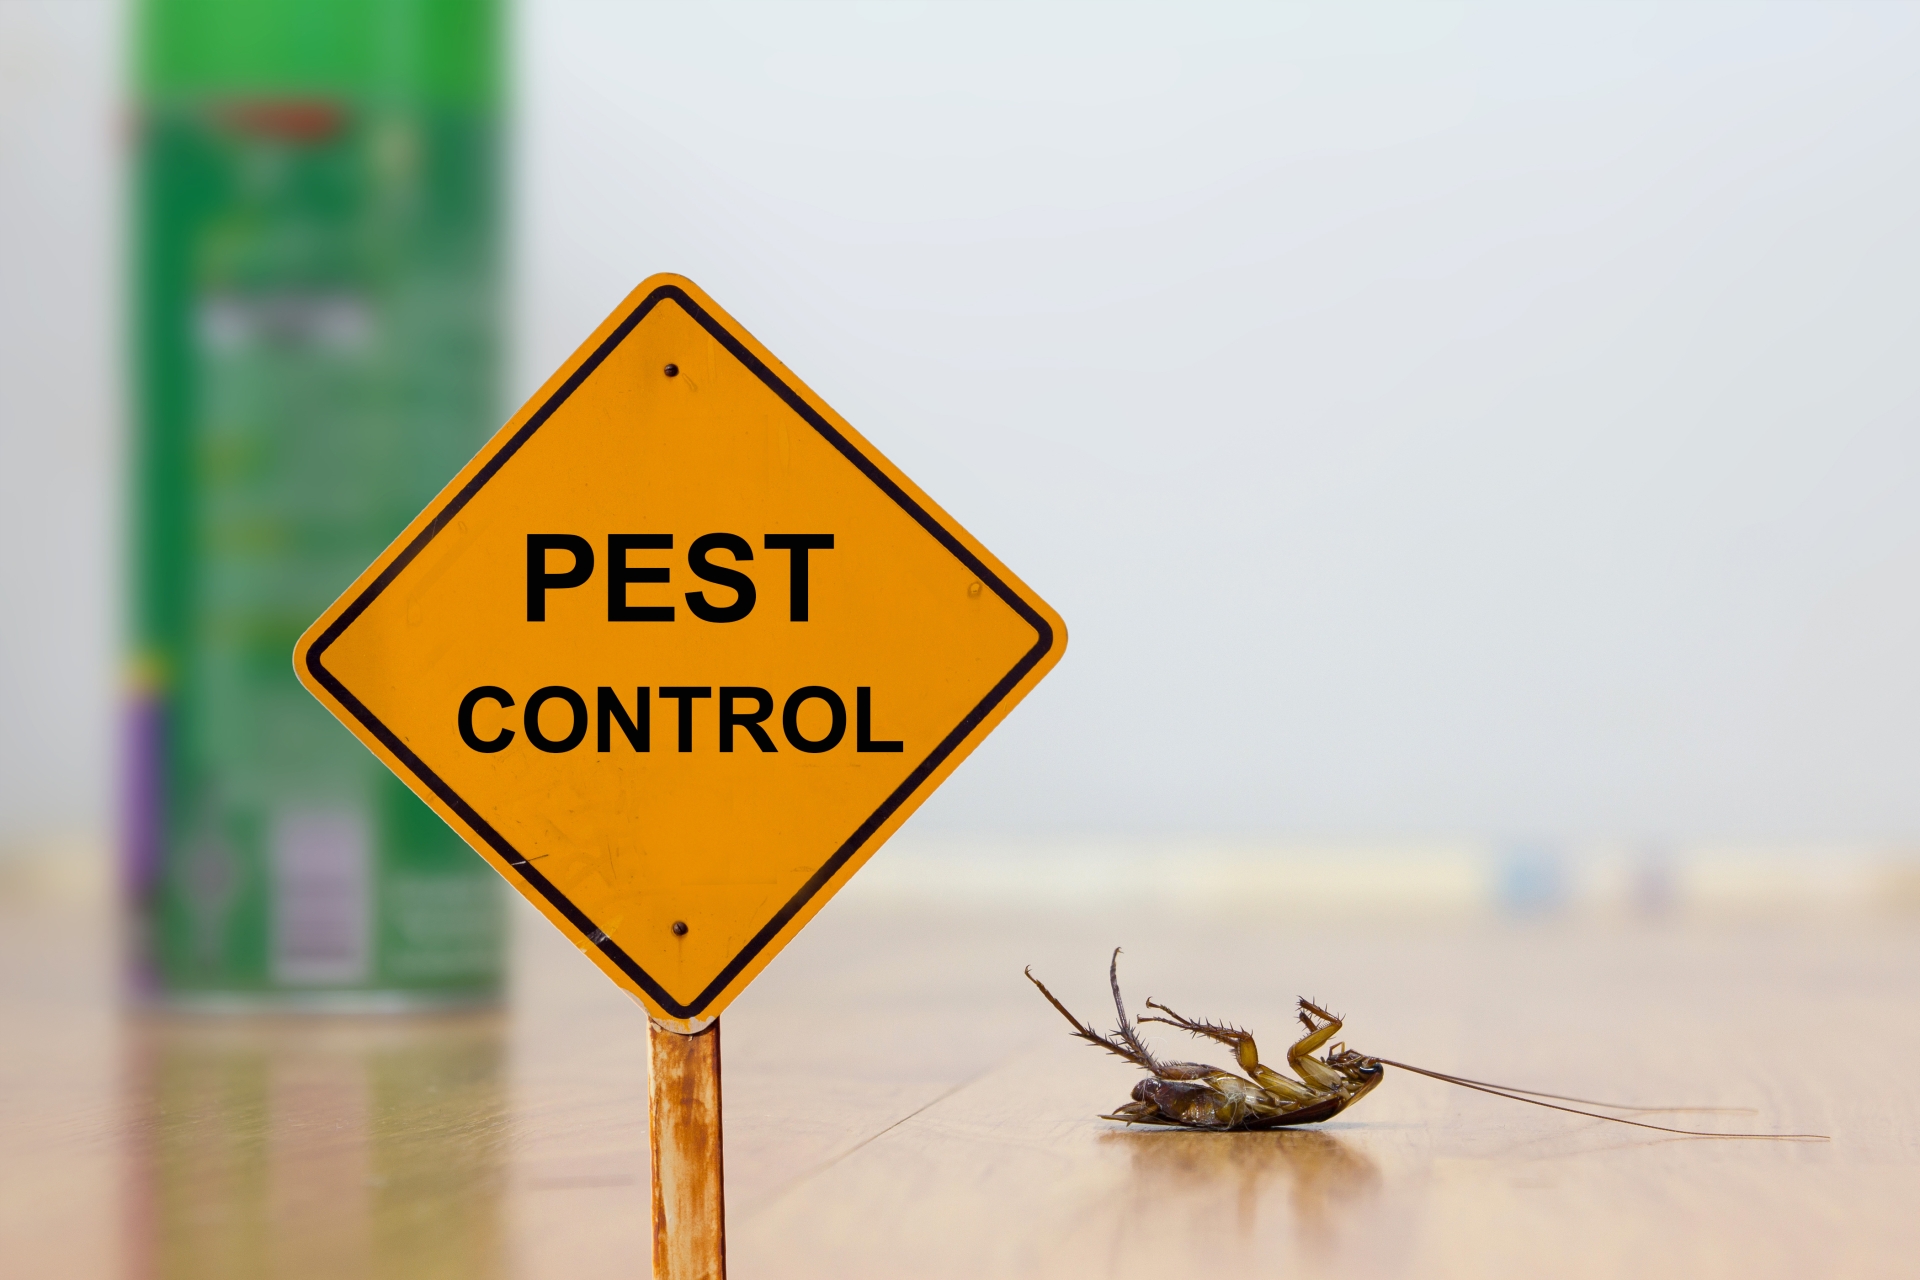 24 Hour Pest Control, Pest Control in North Feltham, East Bedfont, TW14. Call Now 020 8166 9746